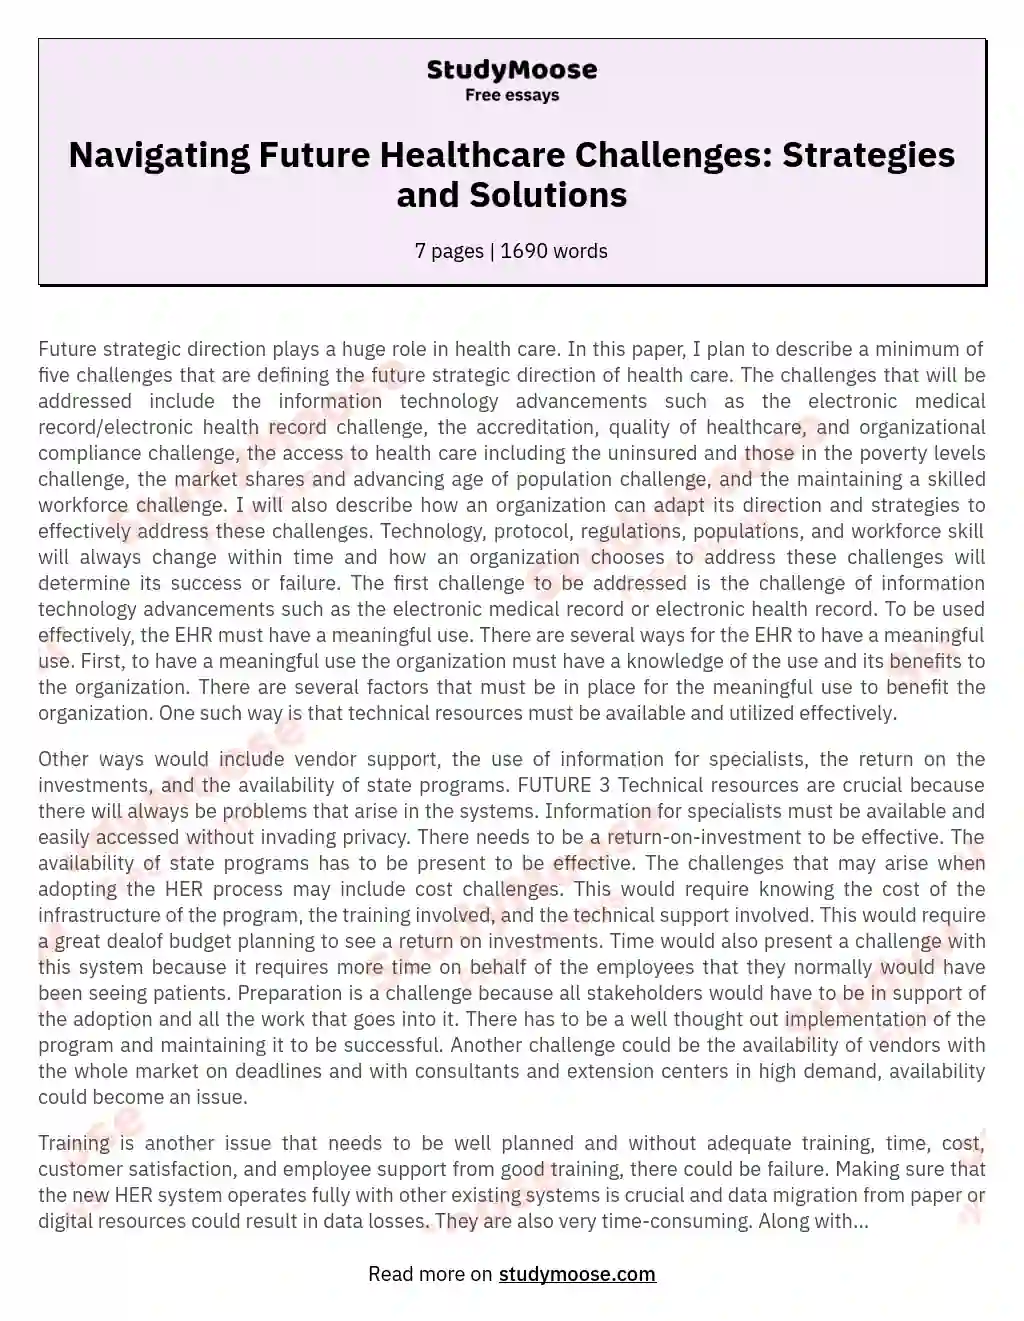 Navigating Future Healthcare Challenges: Strategies and Solutions essay